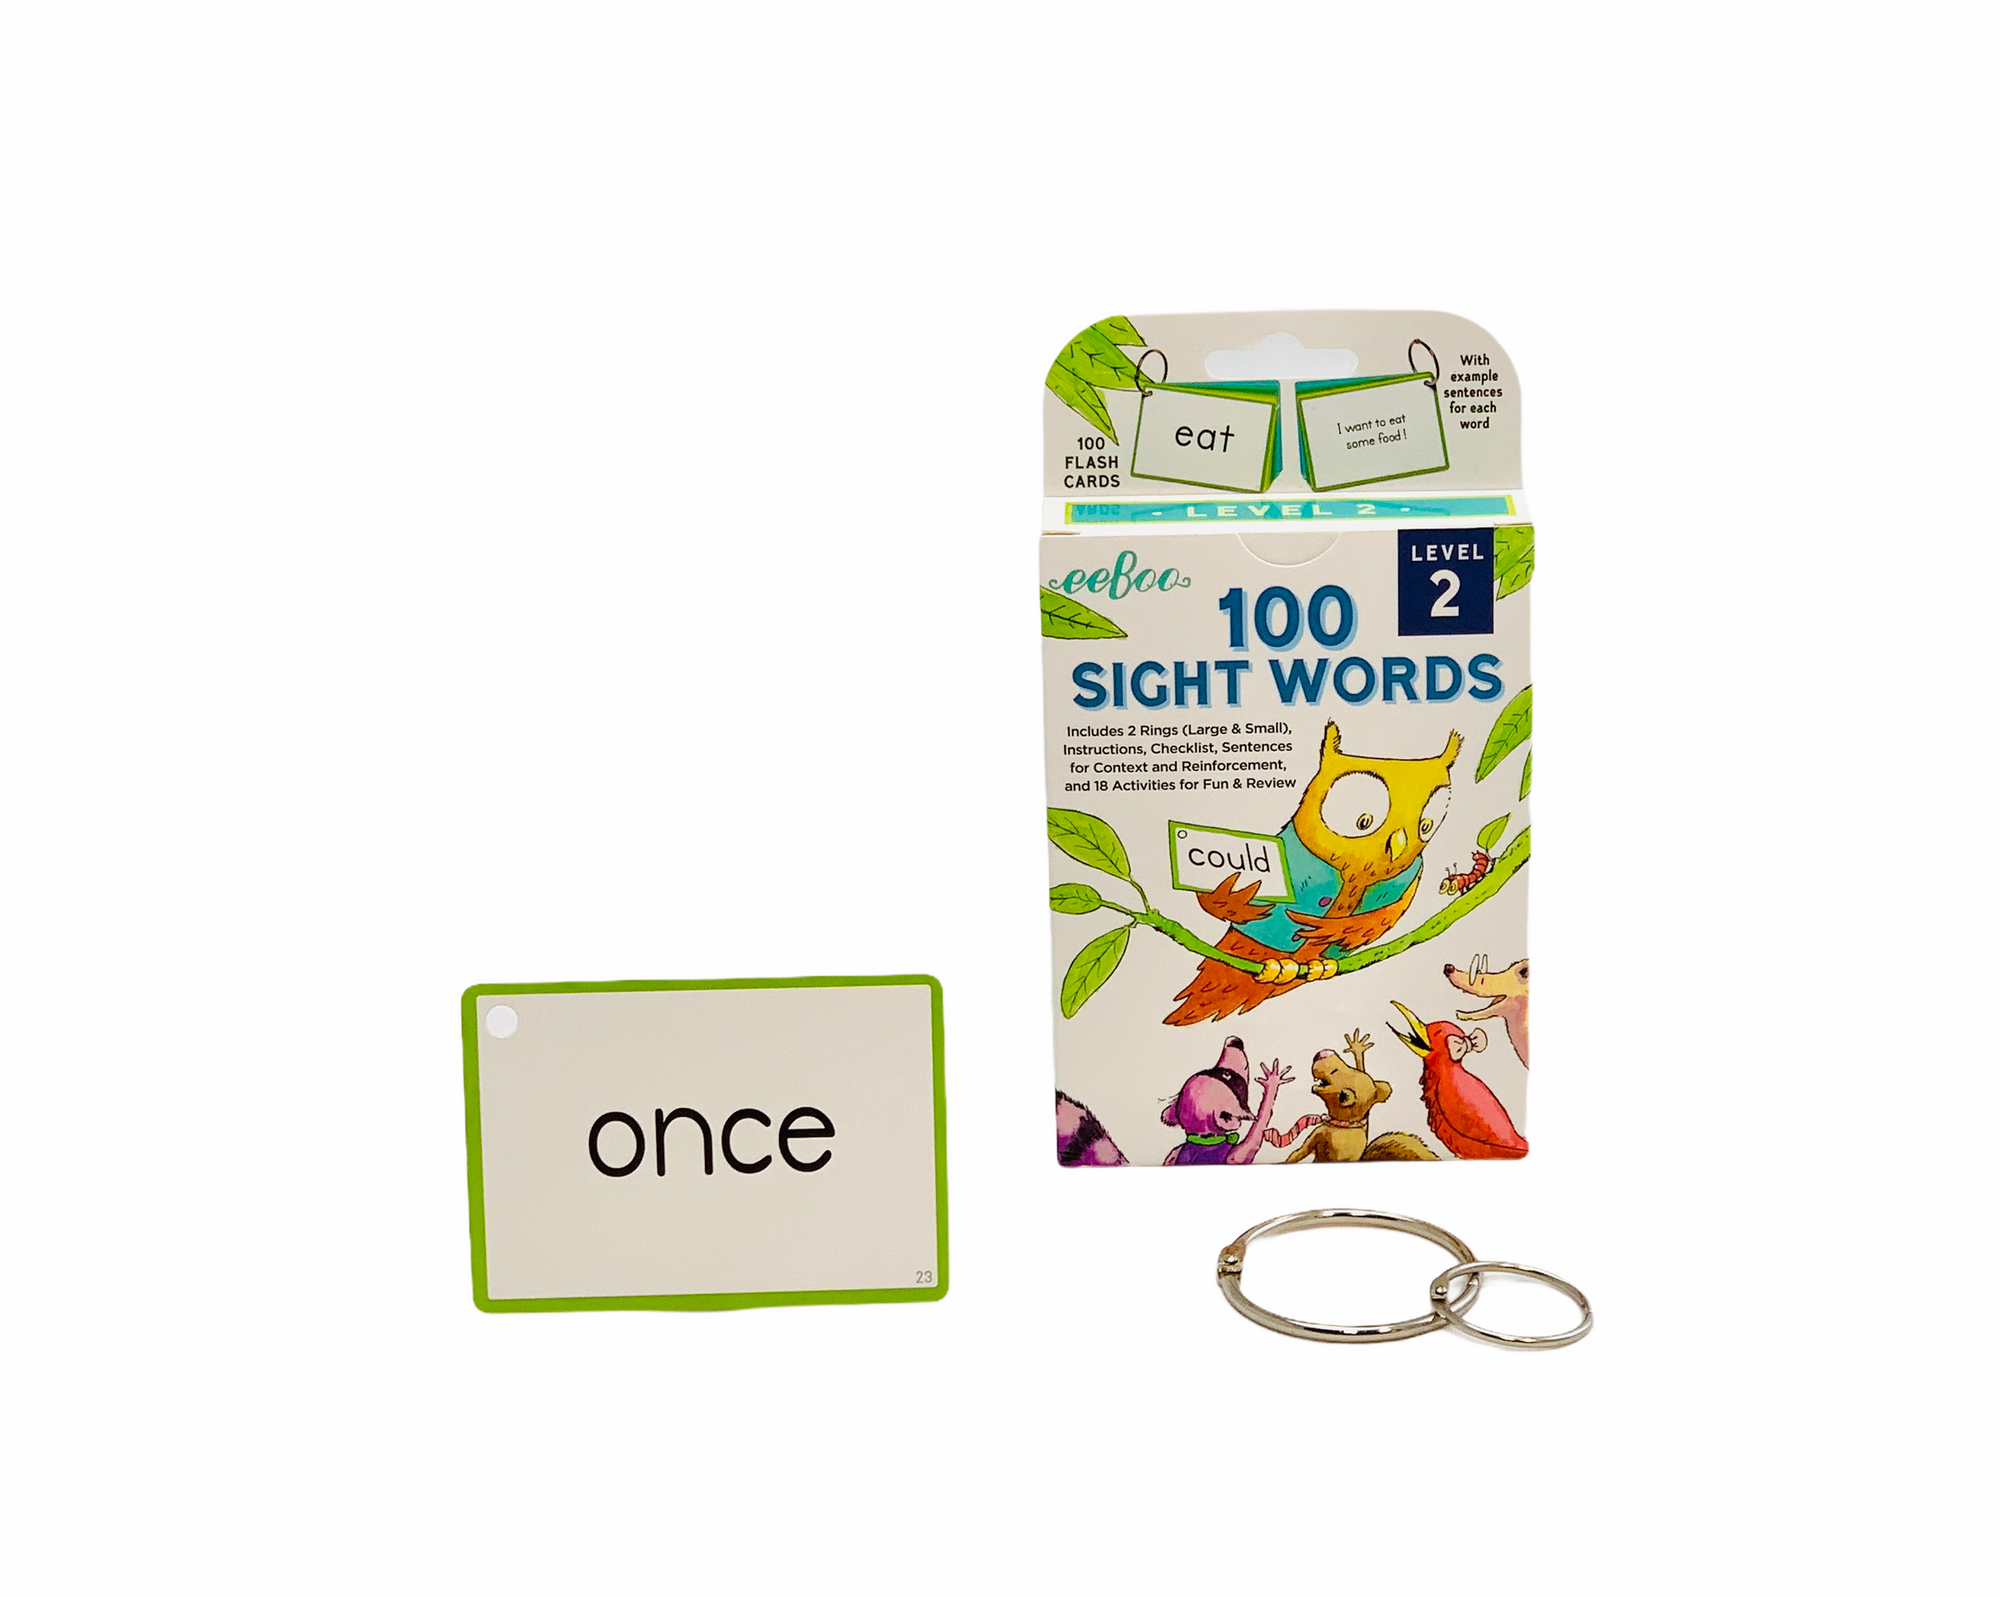 Eeboo 100 Sight Words - Level 2 with a card on display with a card showing the word 'once' in front of packing on white background